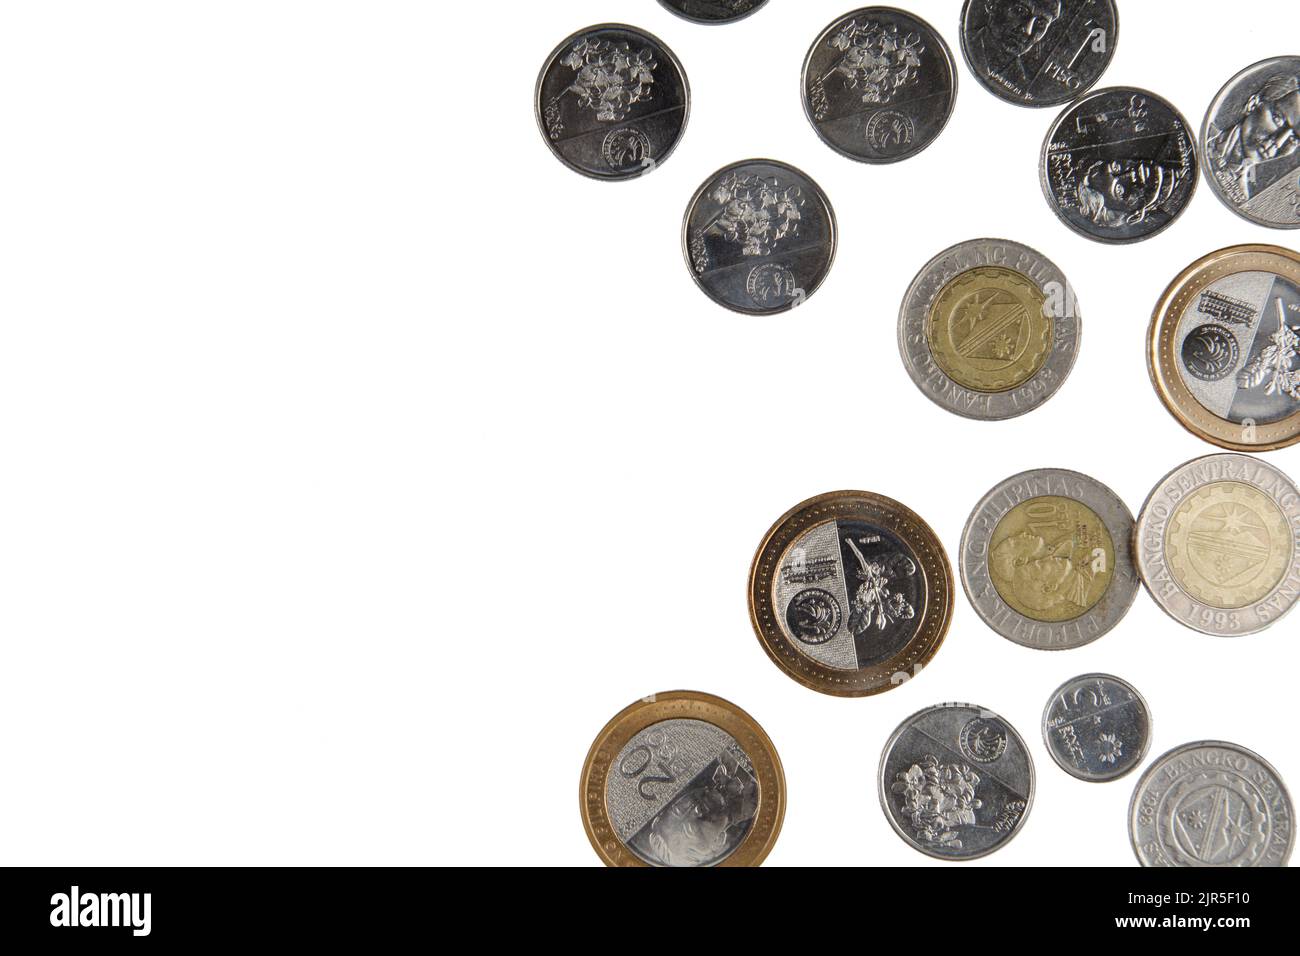 A Flat Lay background of Philippine Coins isolated on a white background with copy space. Stock Photo